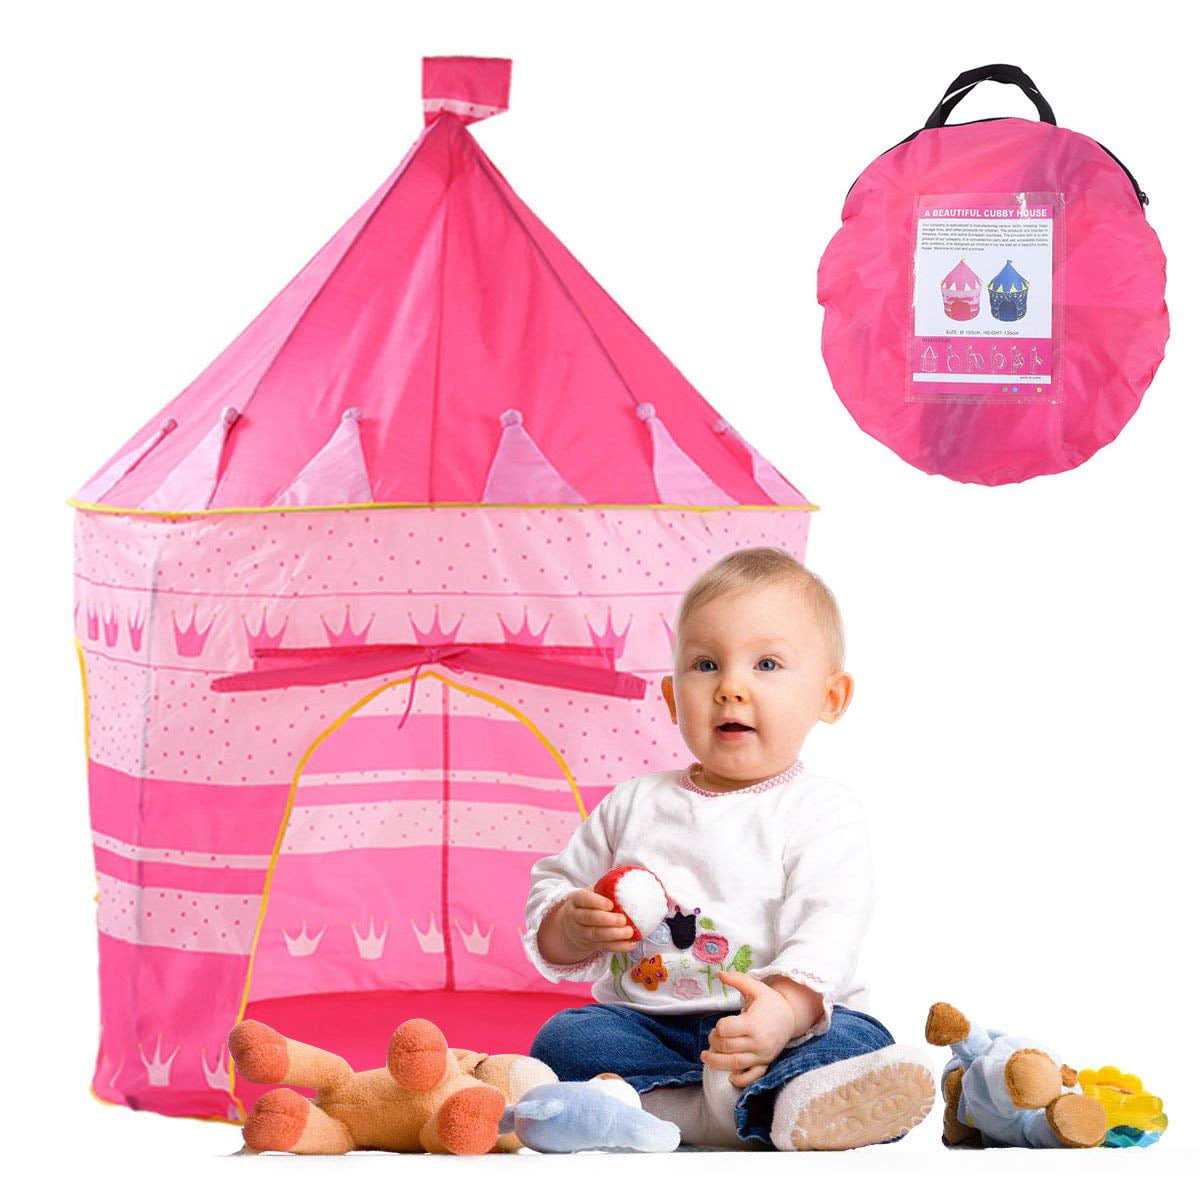 PORTABLE FOLDING PINK PLAY TENT CHILDRENS KIDS CASTLE CUBBY PLAY HOUSE TOY HUT..